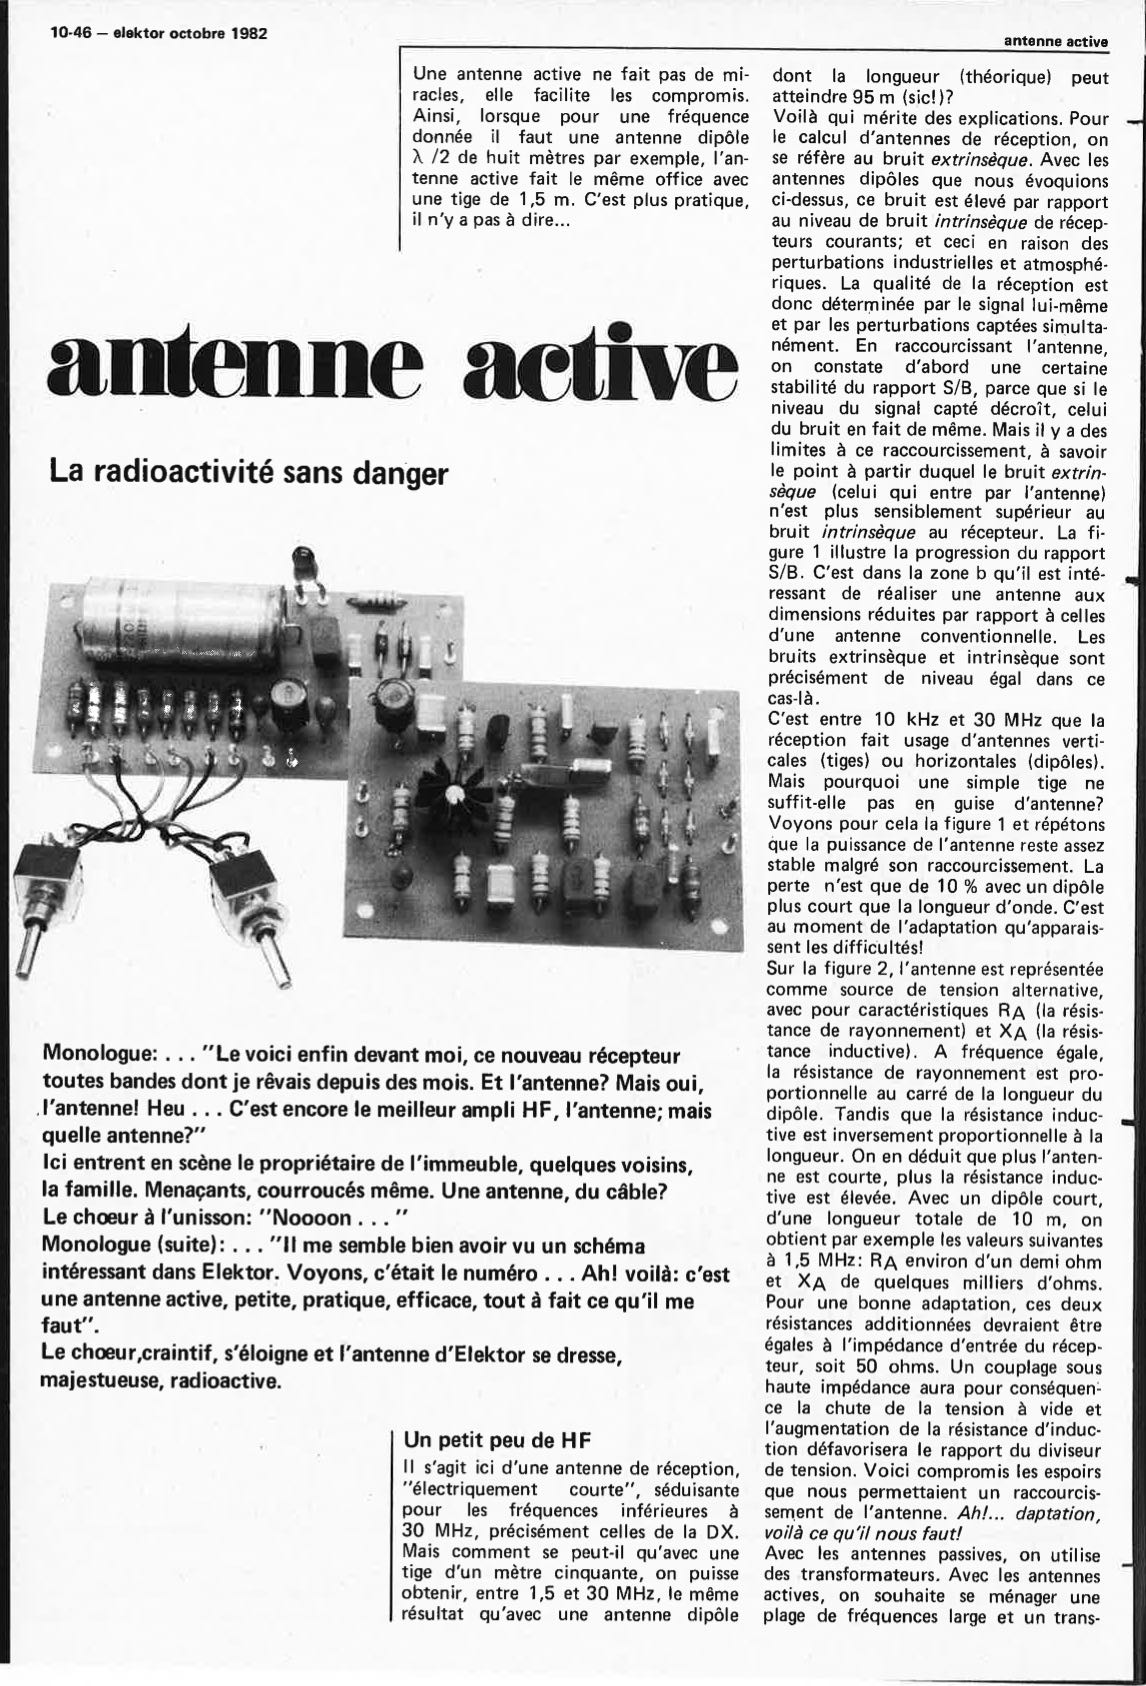 antenne active